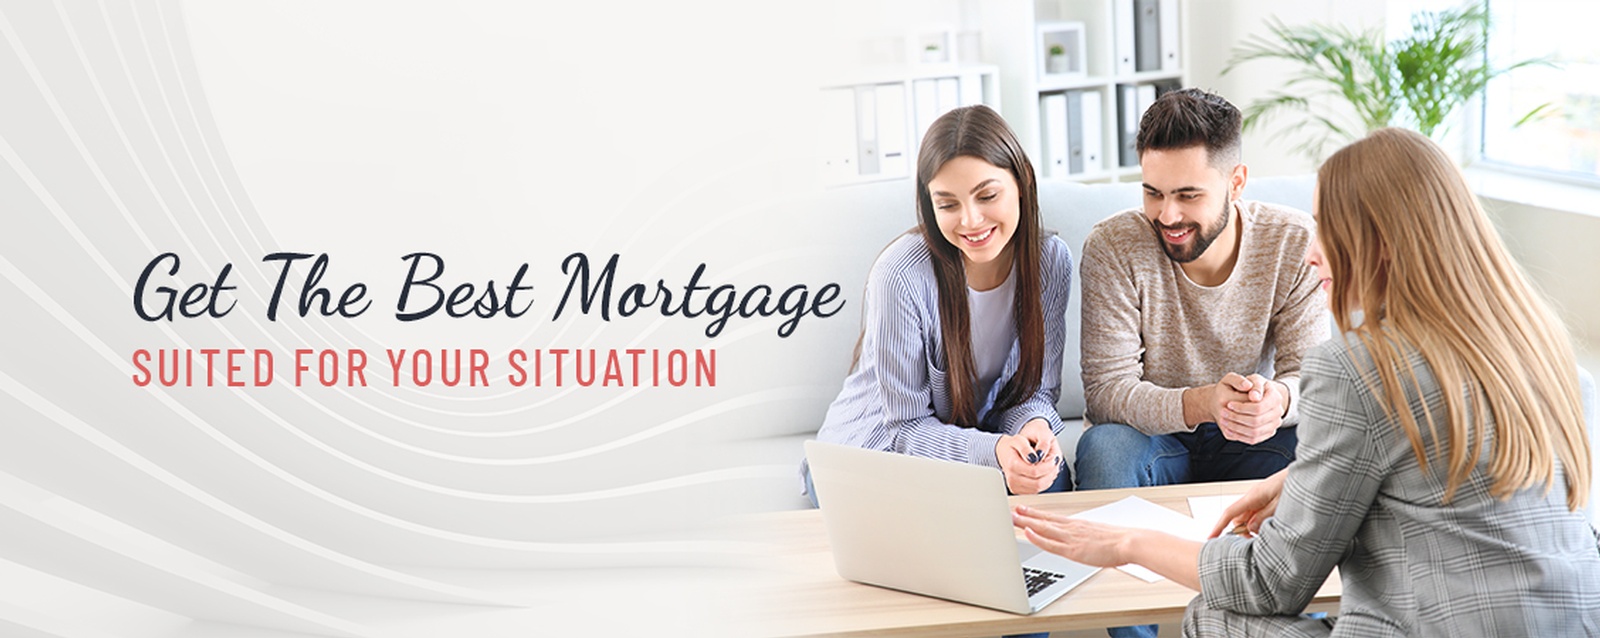 Mortgages During A Relationship Breakdown